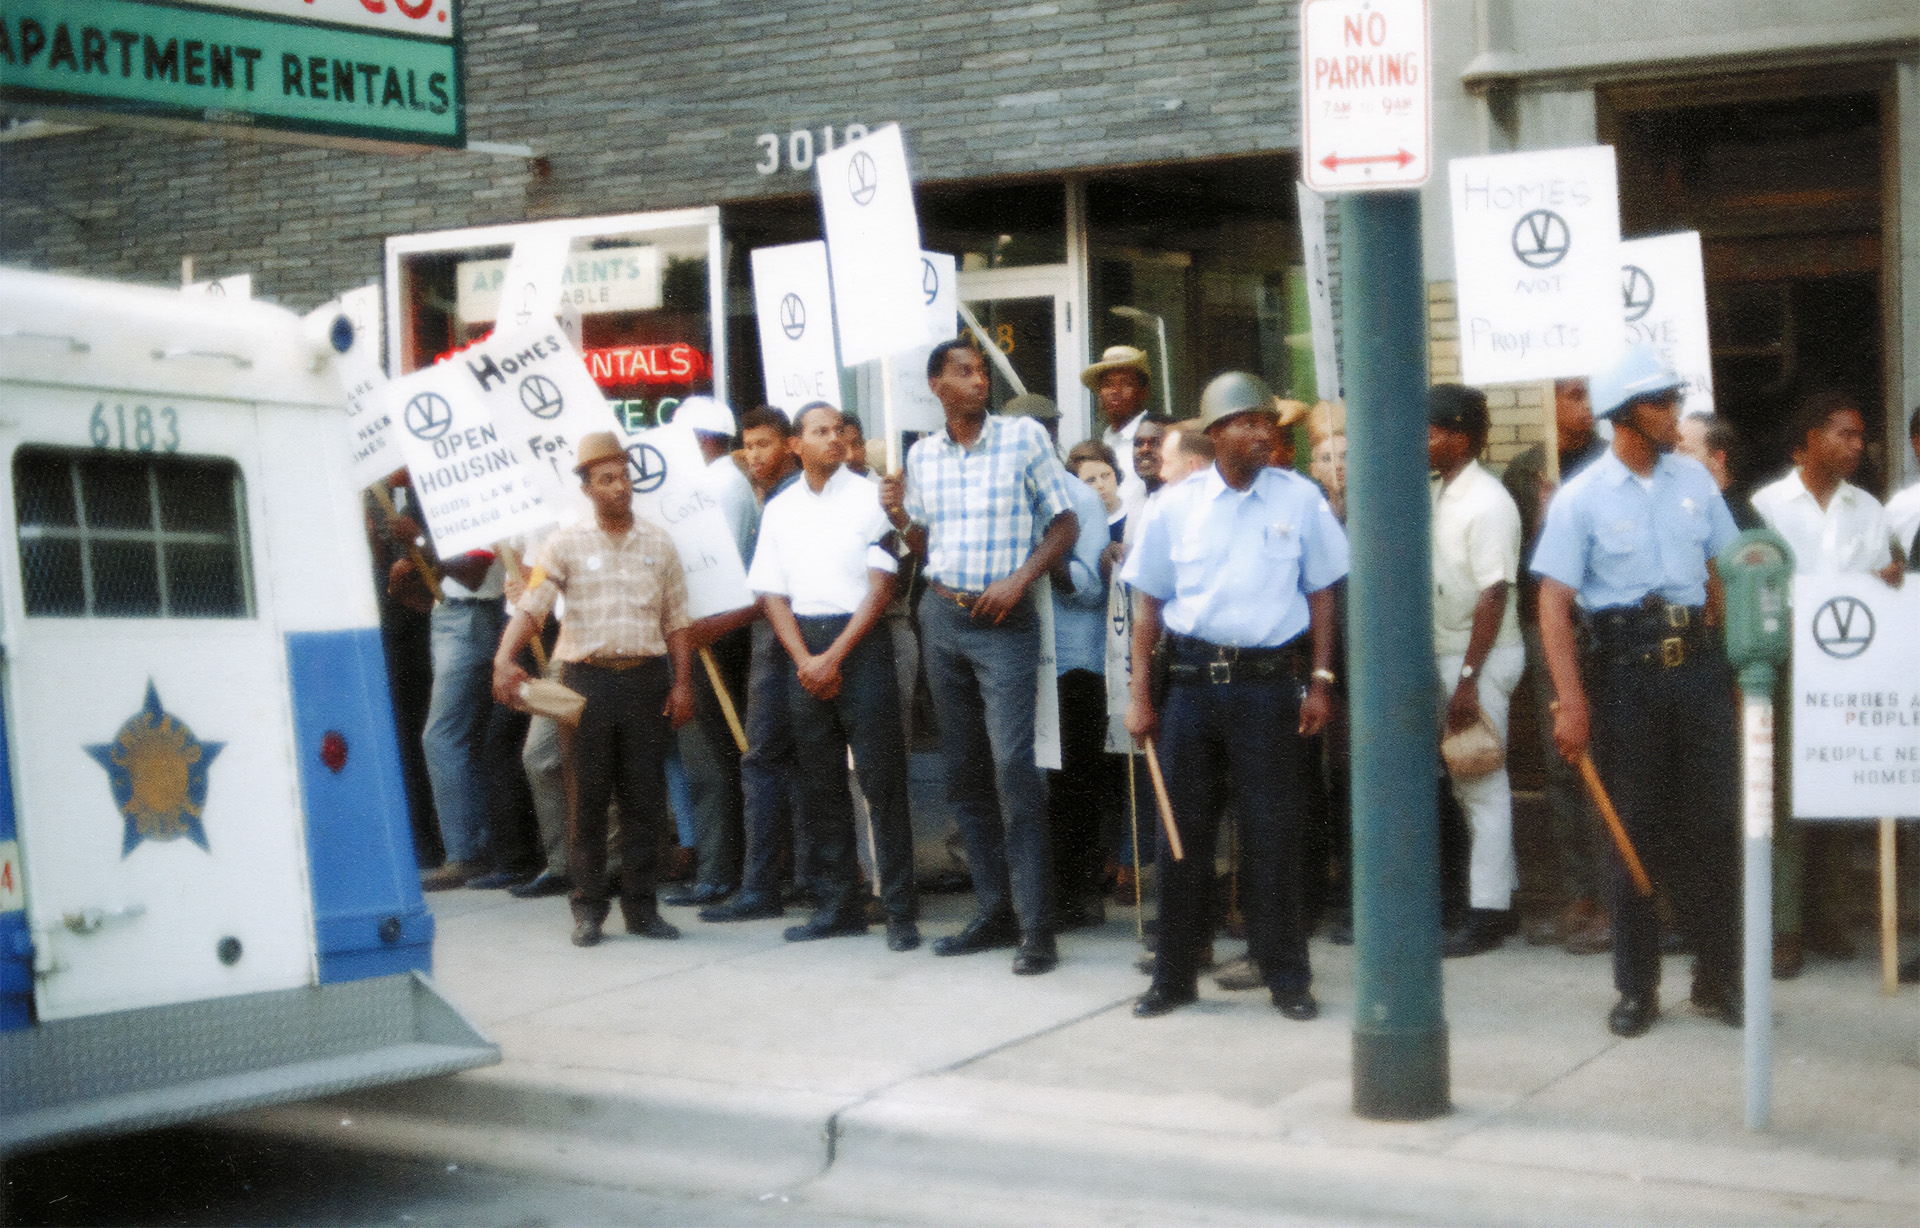 Protests at Chicago real estate offices were a common part of the Chicago Freedom Movement. The signs feature the "End the Slums" emblem that appeared on many materials during these protests.